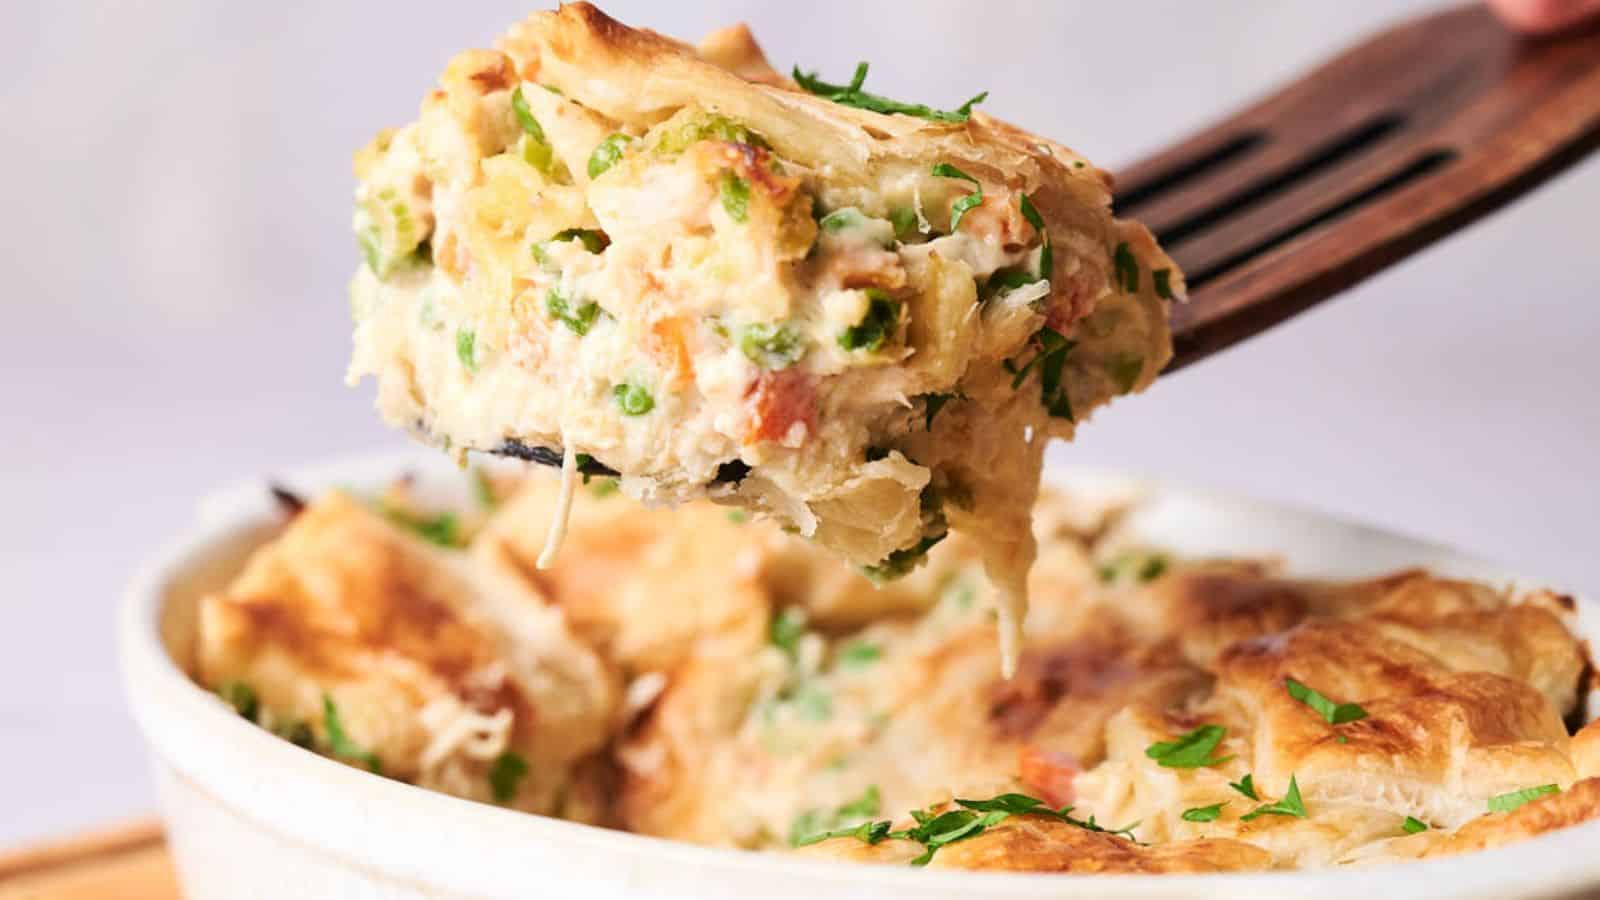 A serving of creamy chicken pot pie casserole with vegetables, lifted on a fork, with a flaky crust and garnished with herbs.